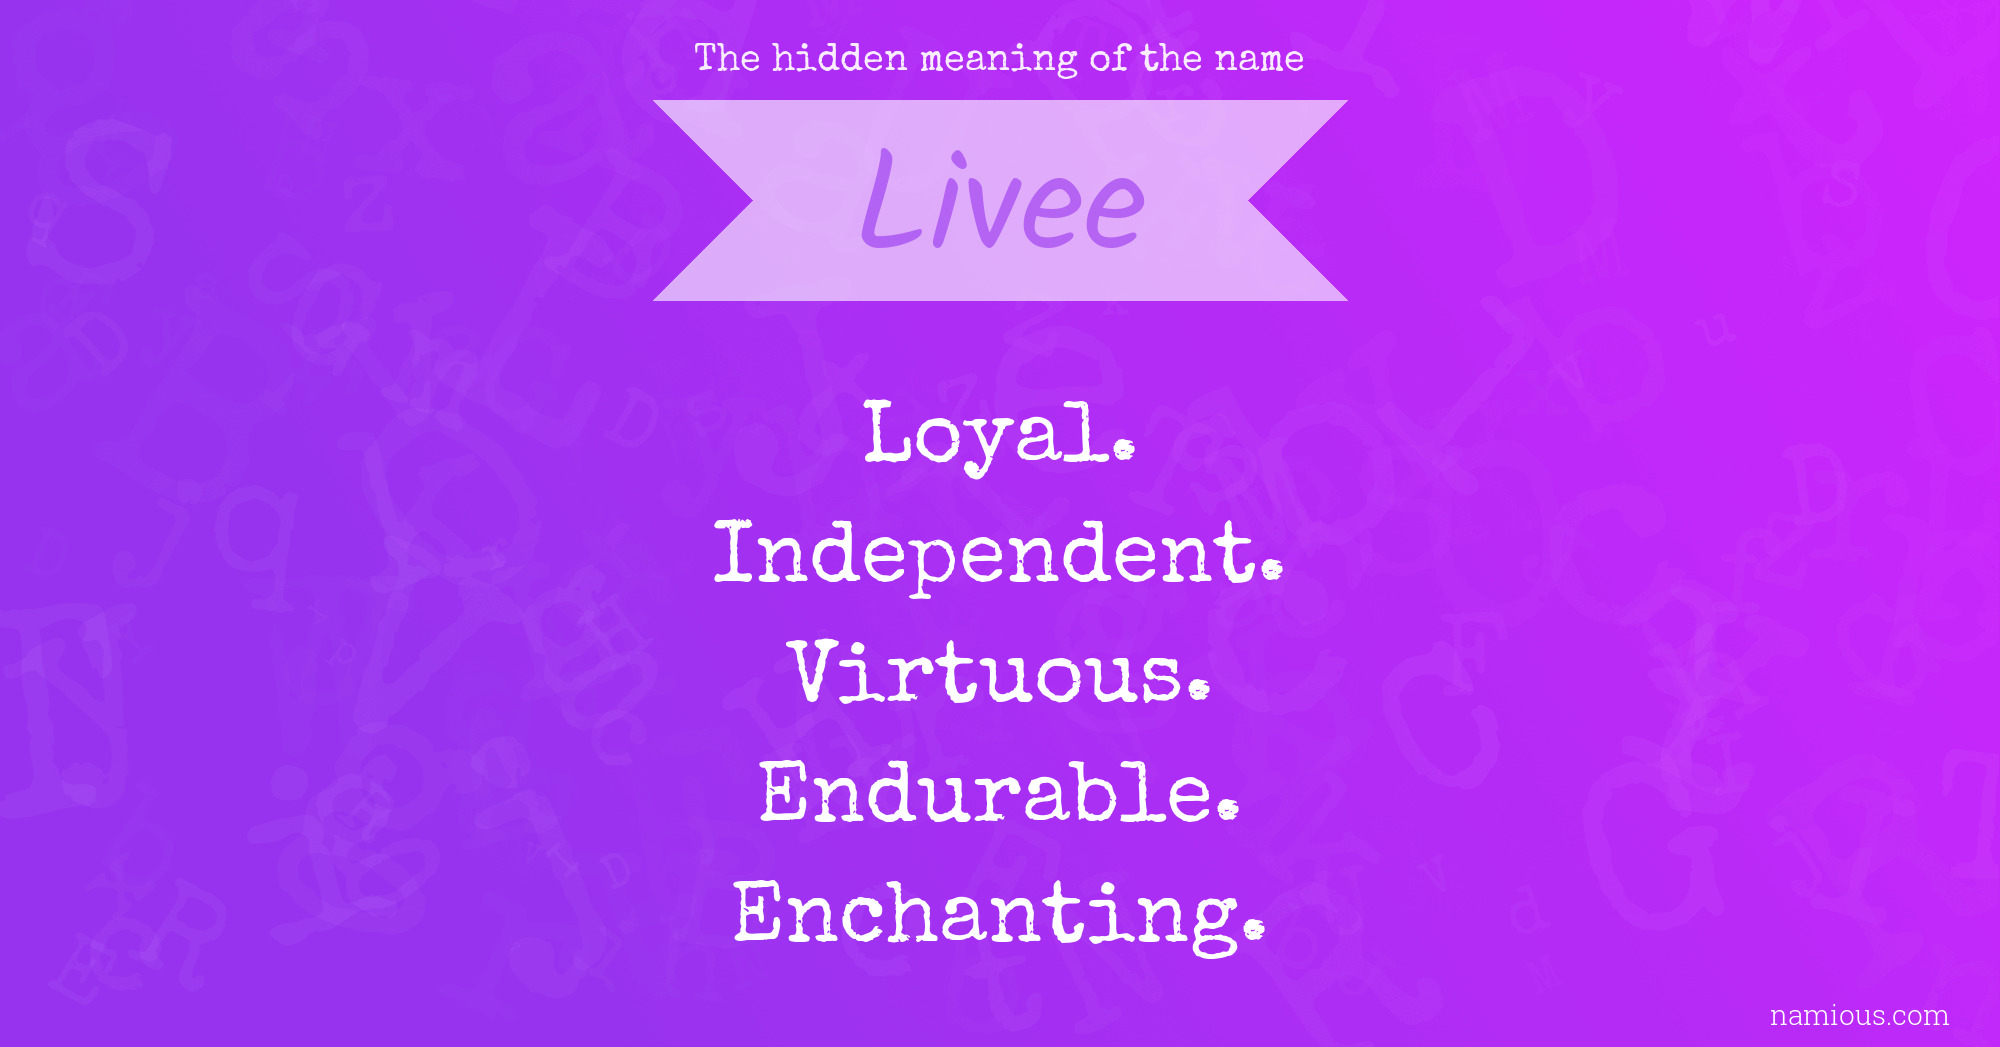 The hidden meaning of the name Livee